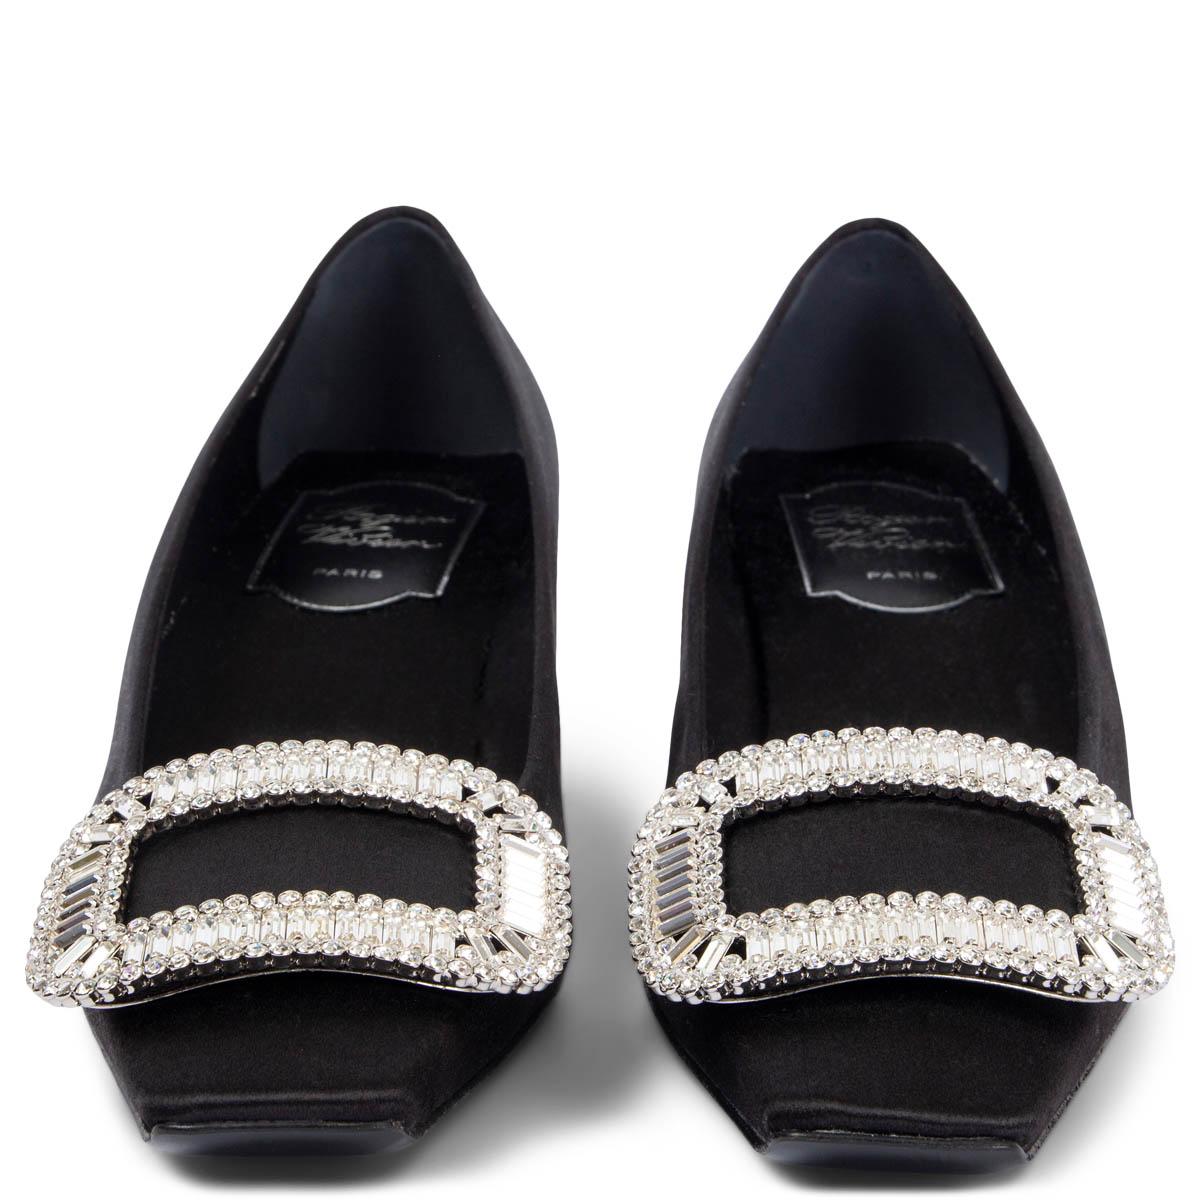 100% authentic Roger Vivier Belle Vivier black satin pumps featuring the label's signature buckle in bright silver-tone metal with crystals and square toe. Brand new. Come with dust bags. 

Measurements
Imprinted Size	36
Shoe Size	36
Inside